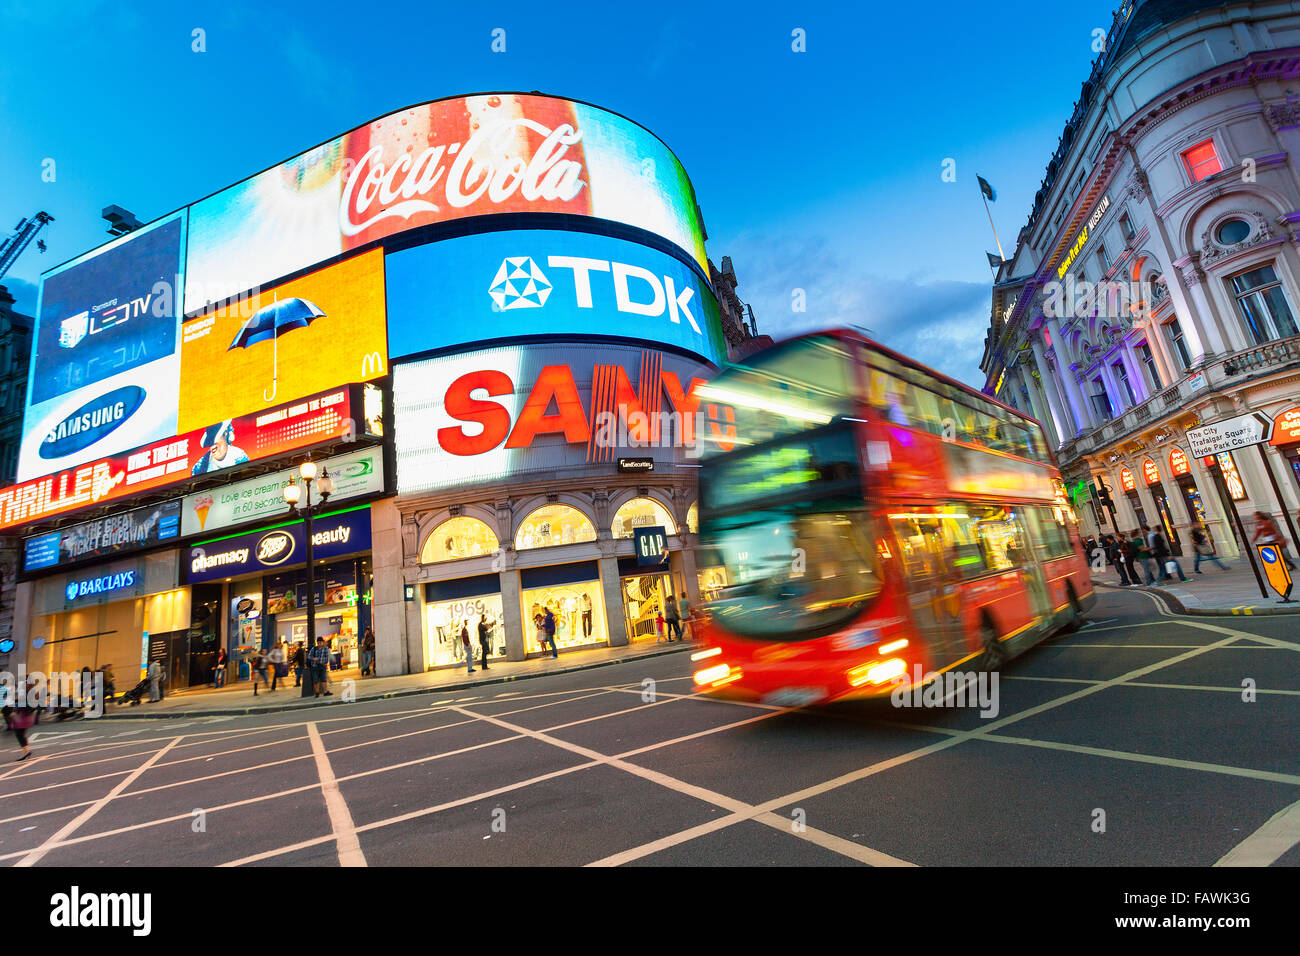 London, Piccadilly Circus, beleuchtet Stockfoto